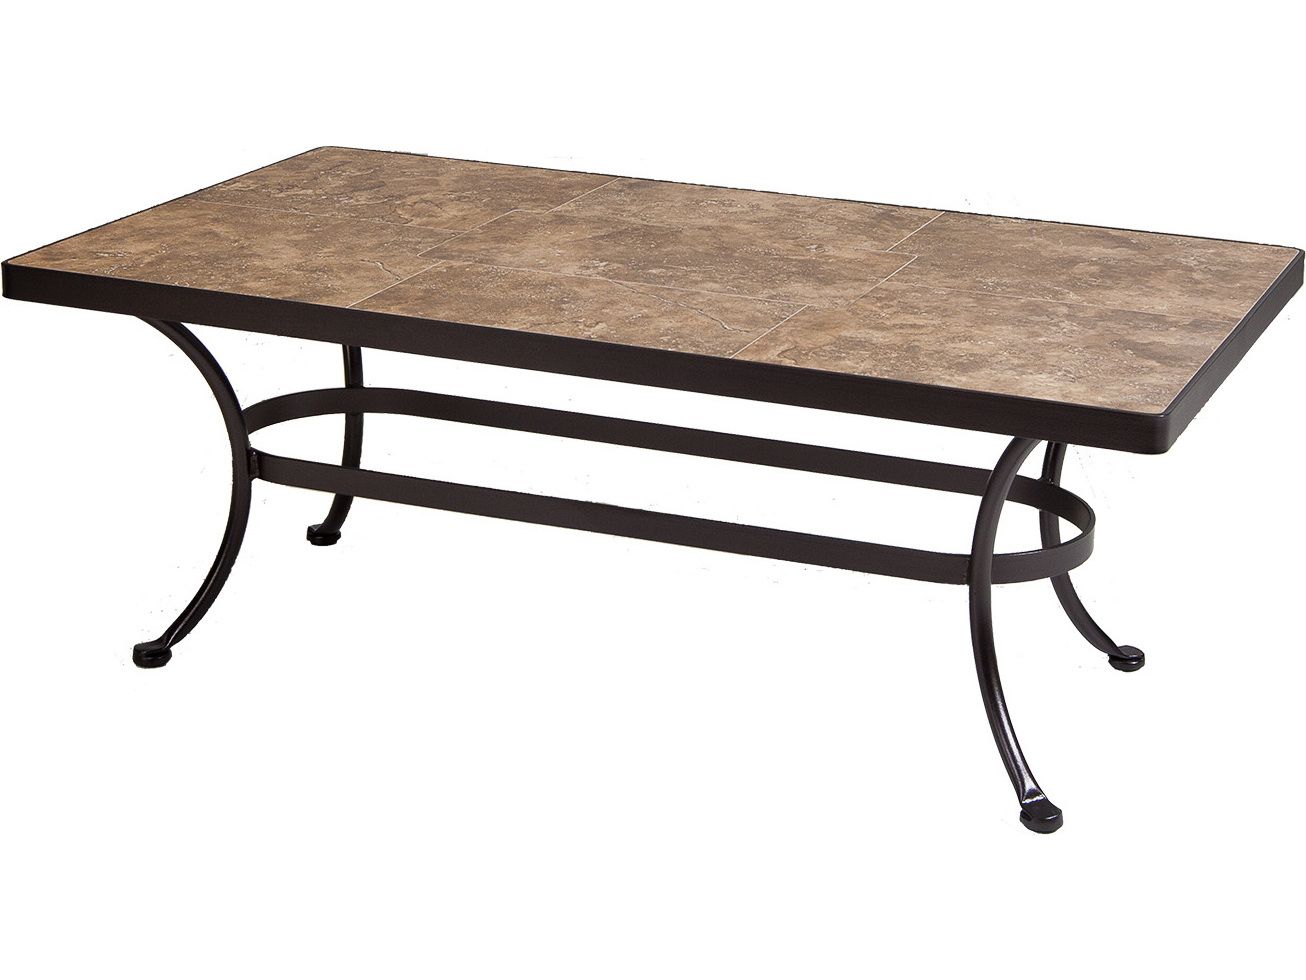 Ow Lee Wrought Iron Rectangular Coffee Table Base 43w X 20''d X 17.5h Within Rectangular Coffee Tables With Pedestal Bases (Gallery 7 of 20)